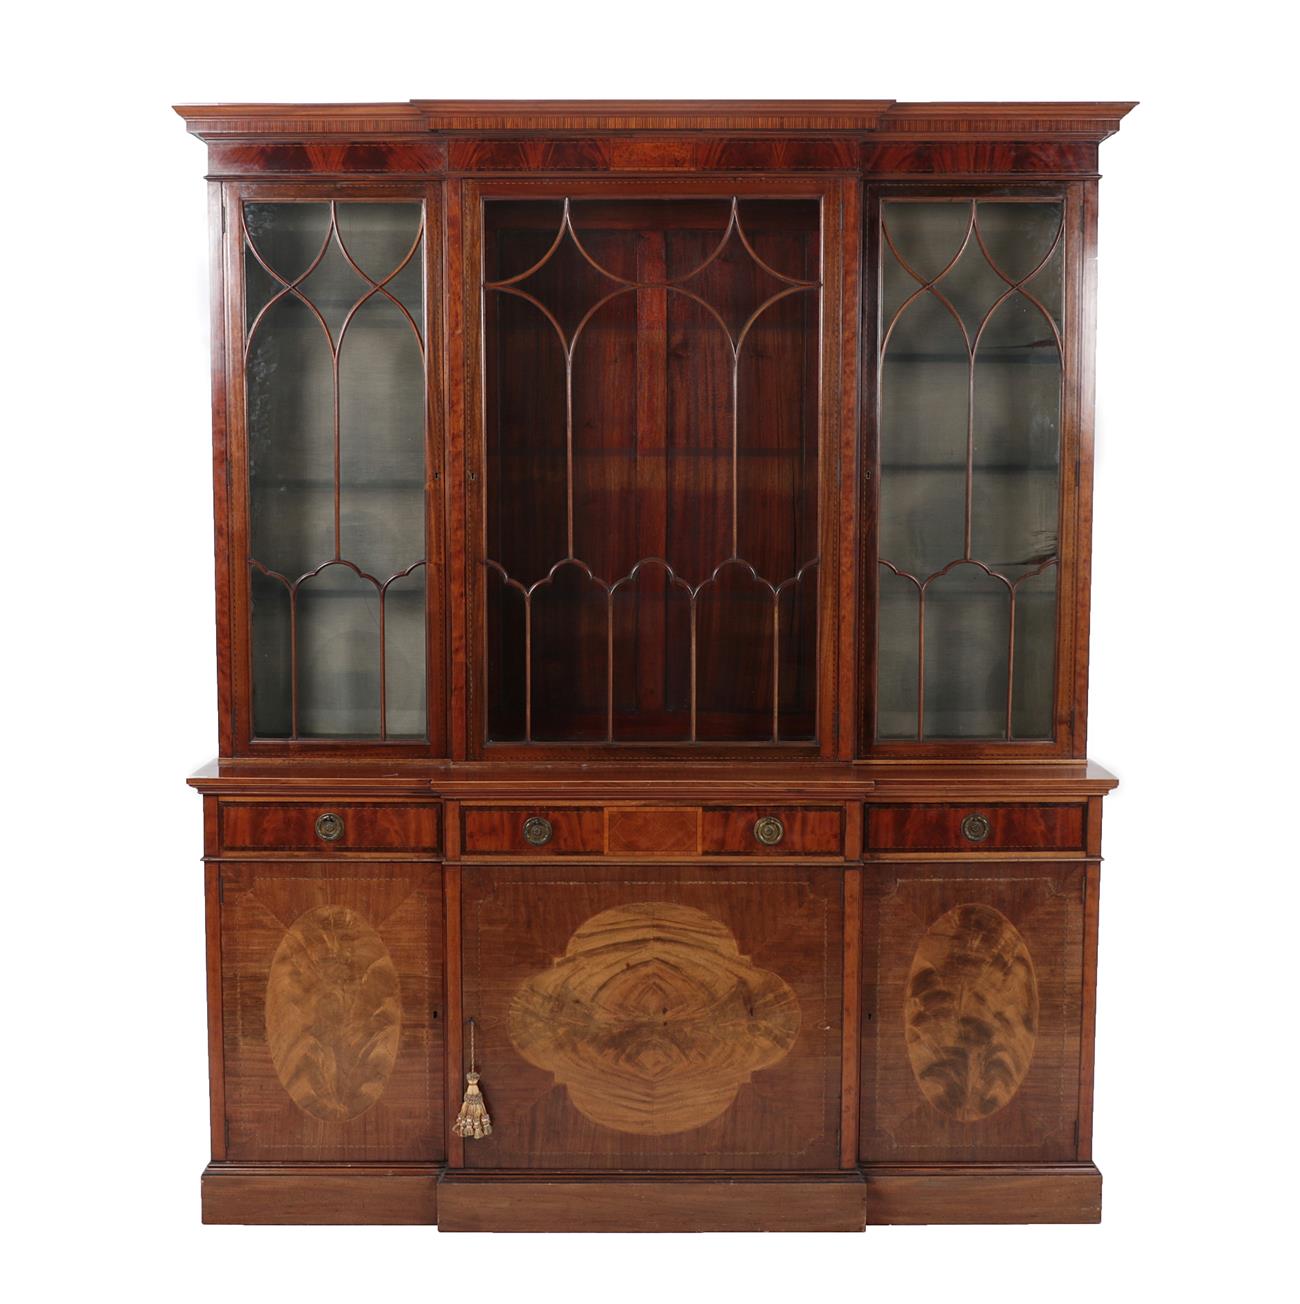 Lot 593 - A Mahogany and Satinwood Banded Breakfront Bookcase, stamped Warings, late 19th century, with three